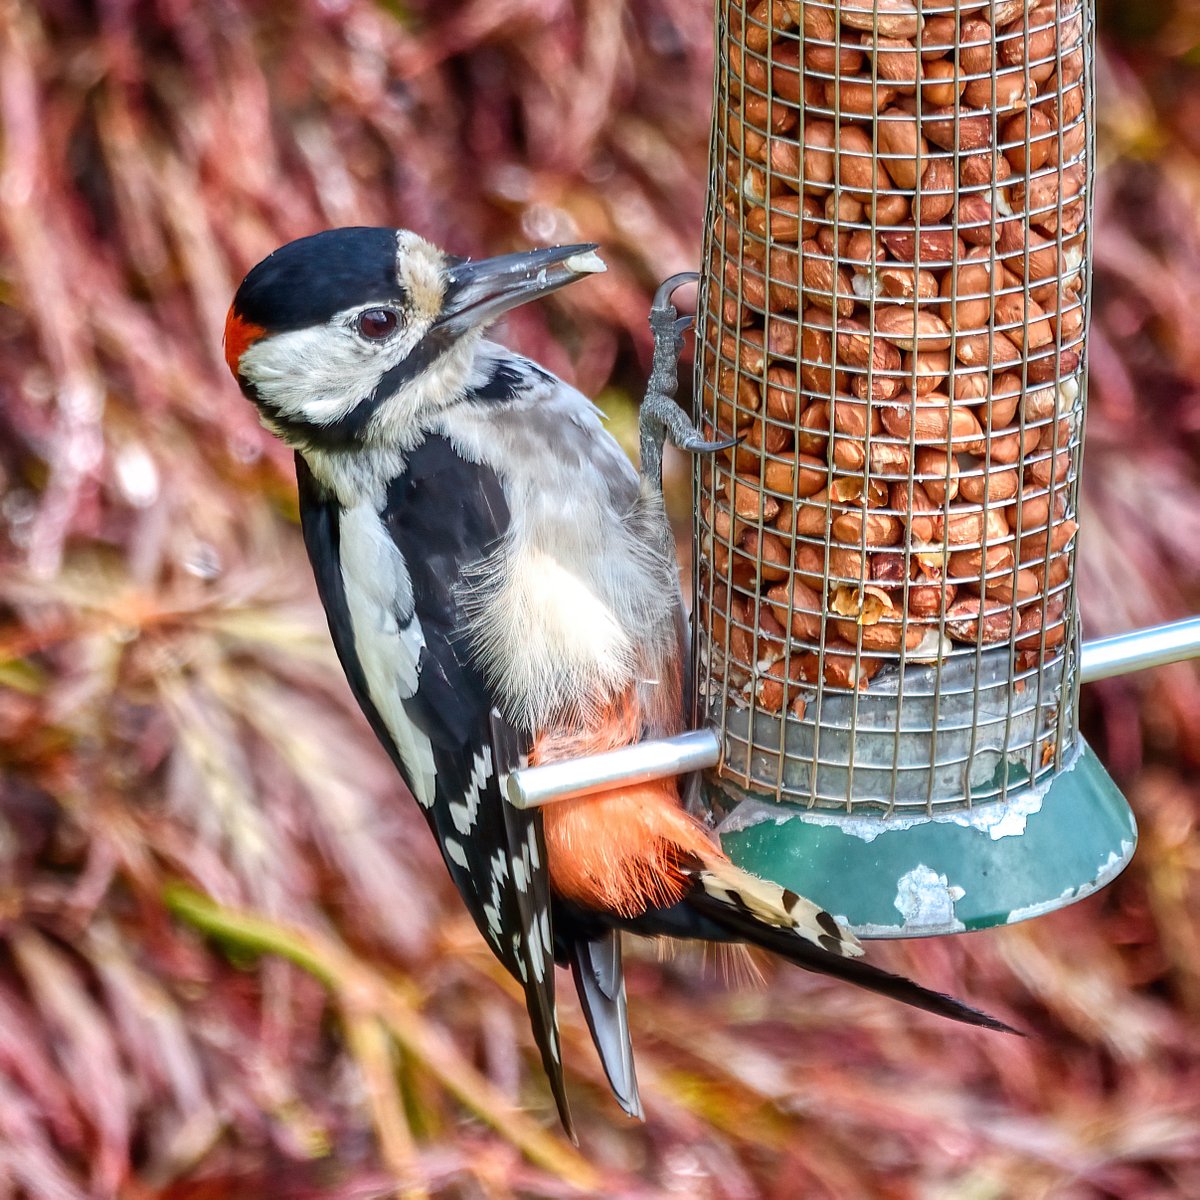 Great spotted woodpecker visiting the garden this afternoon. We haven't had many visiting in recent times, so good to see. #woodpecker #birdphotography #birding #birdwatching #scotland